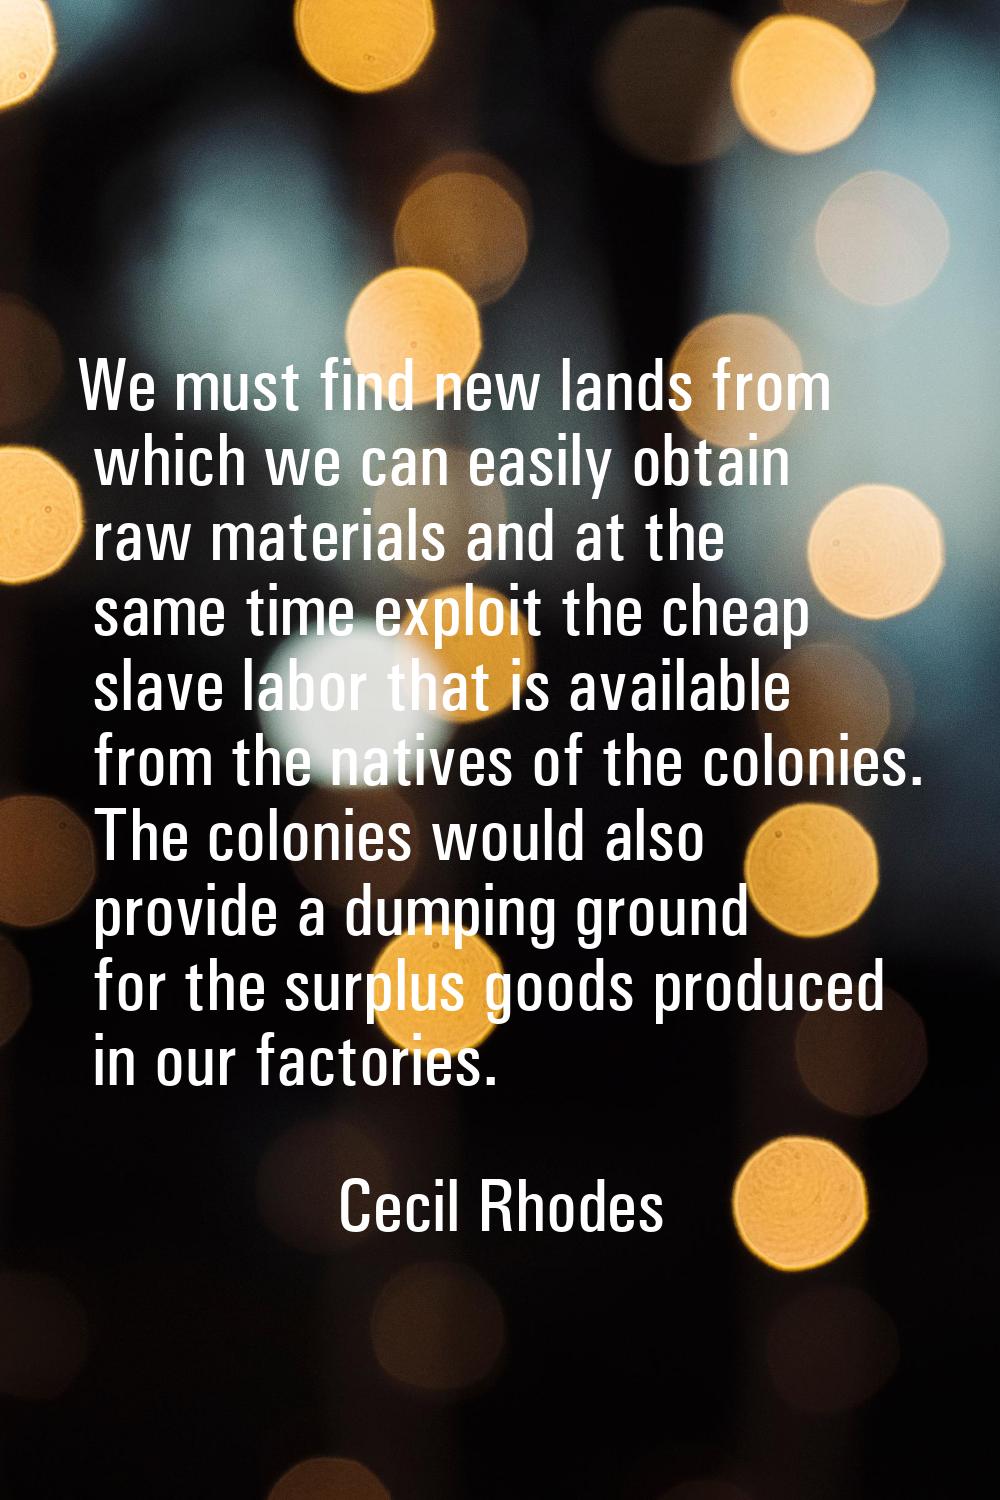 We must find new lands from which we can easily obtain raw materials and at the same time exploit t